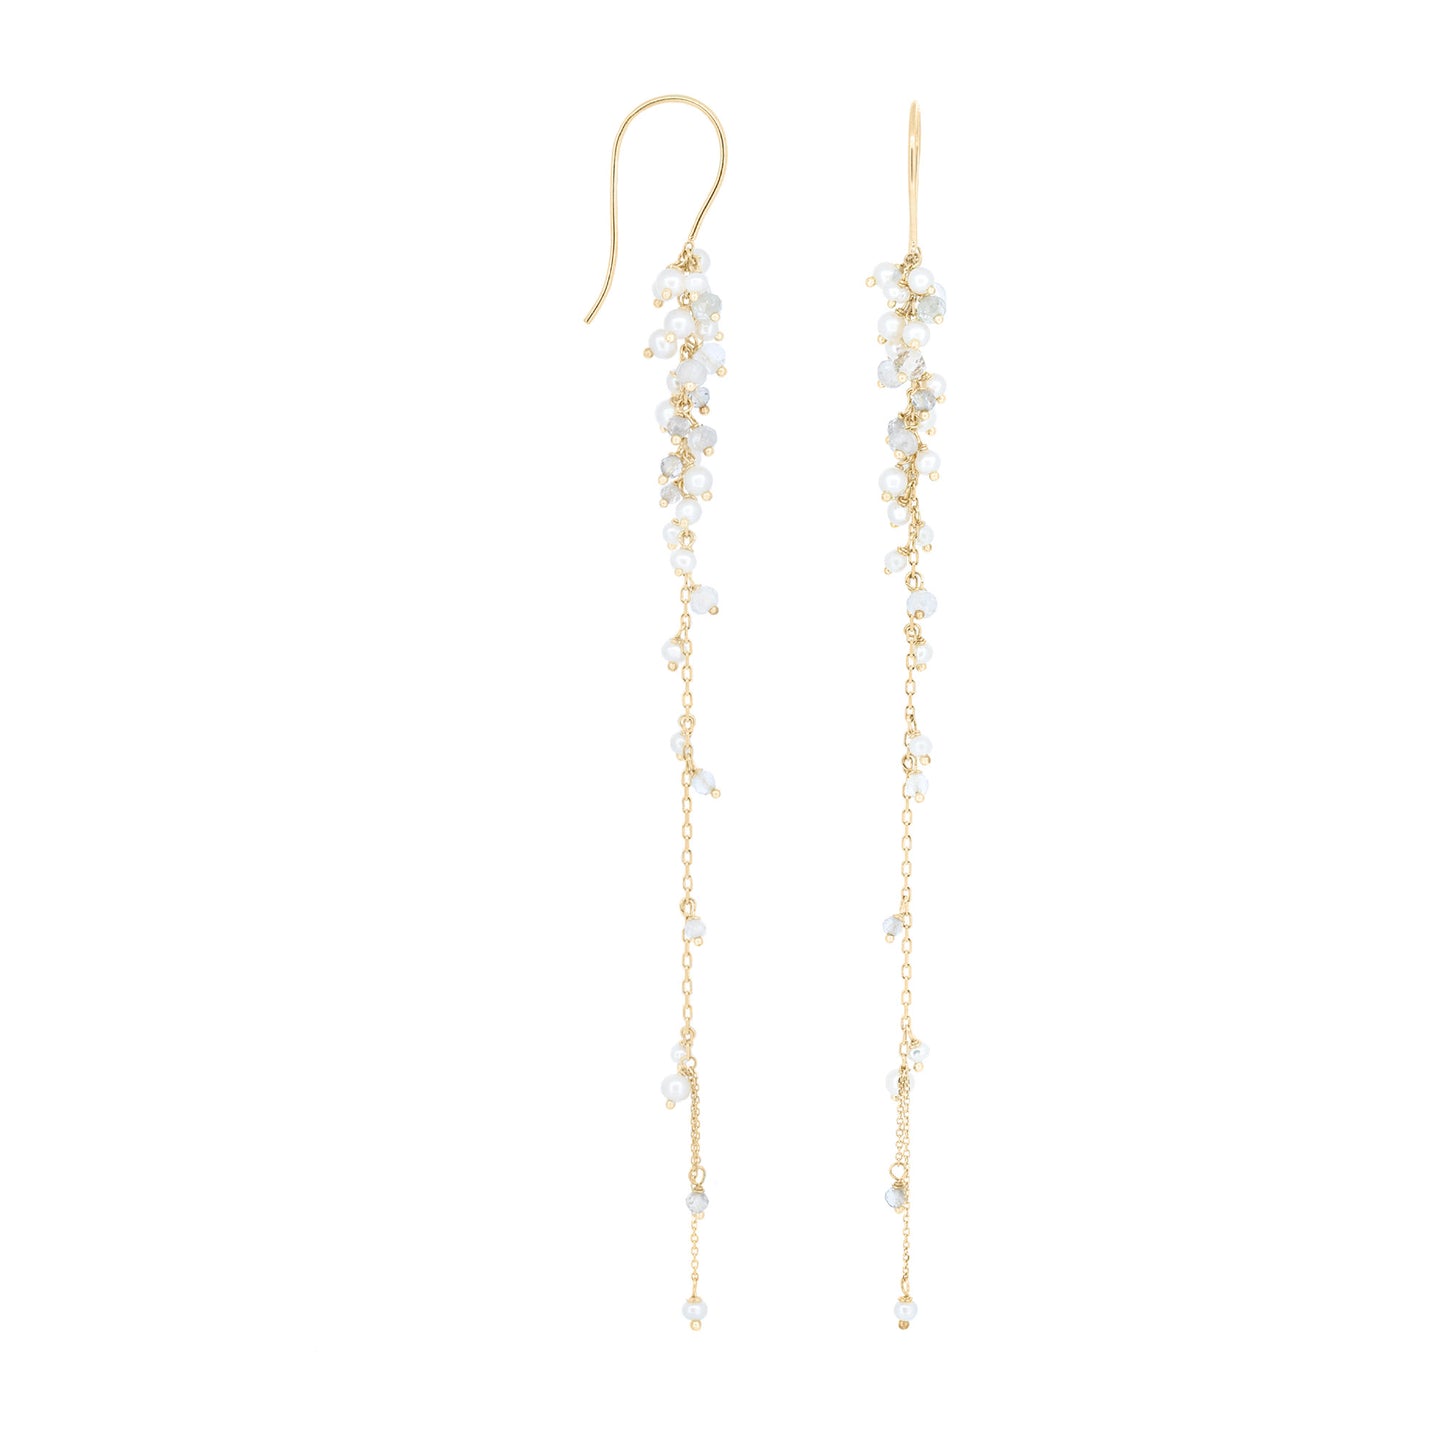 18ct Gold hook earrings with Pearls and Crystal beads.